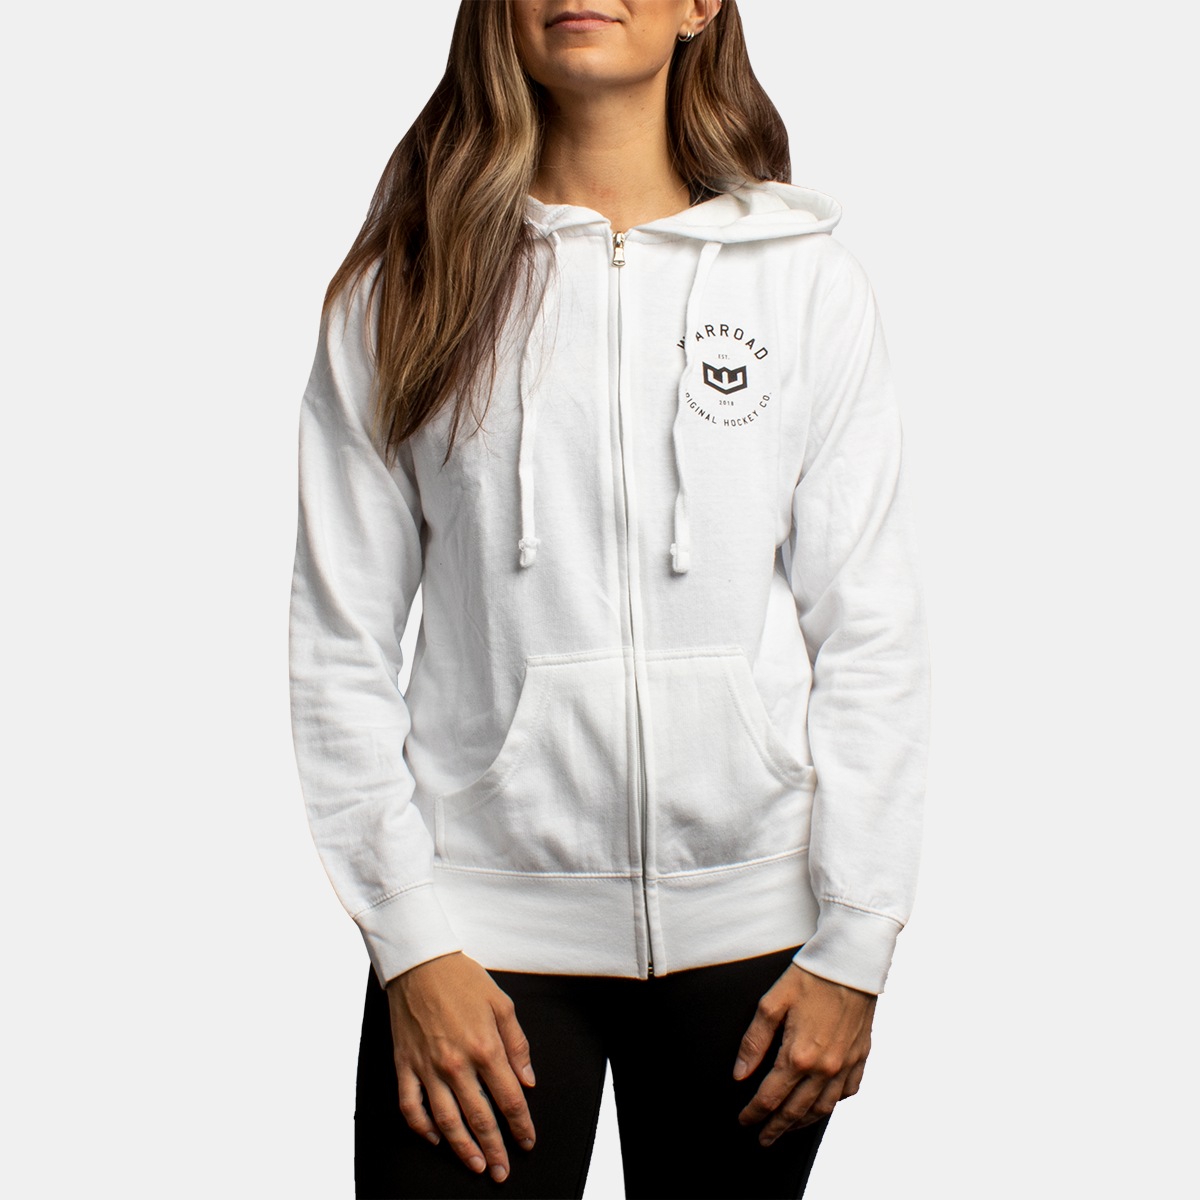 Warroad Player Collection Hoodie - Adult